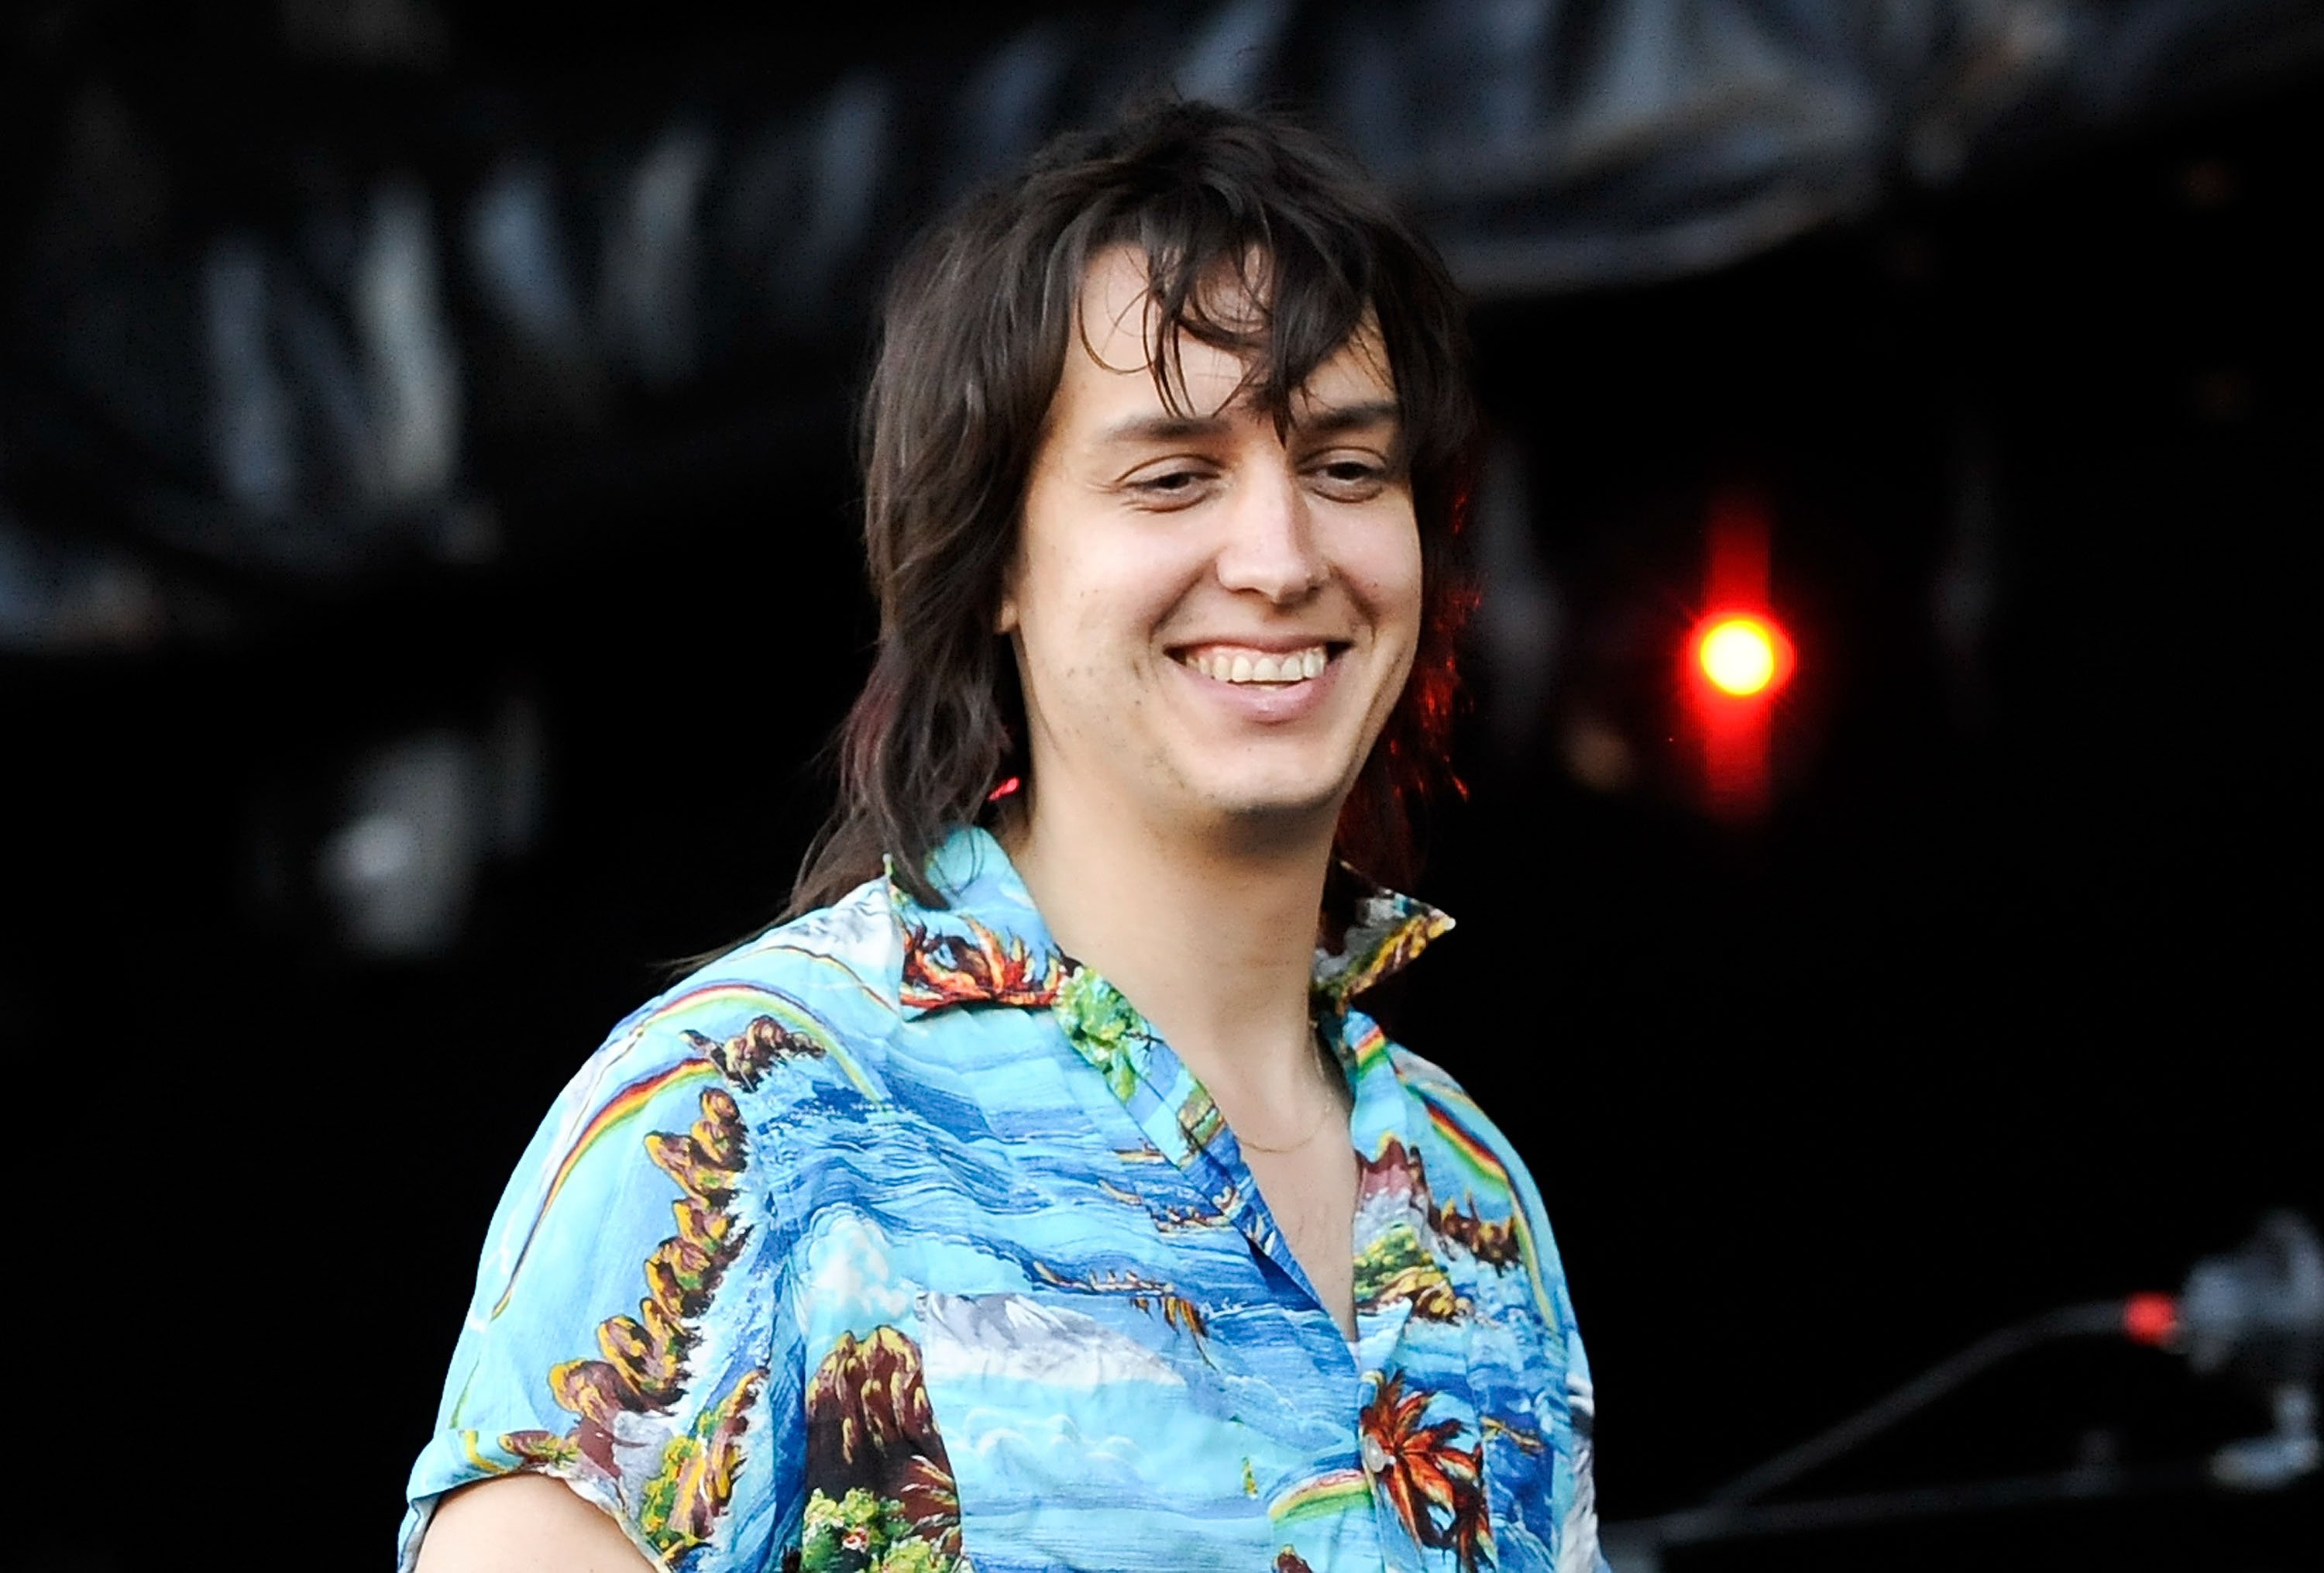 The Strokes lead singer Julian Casablancas performing at the 2014 Governors Ball Music Festival at Randall's Island, New York on June 7, 2014. | Source: Getty Images